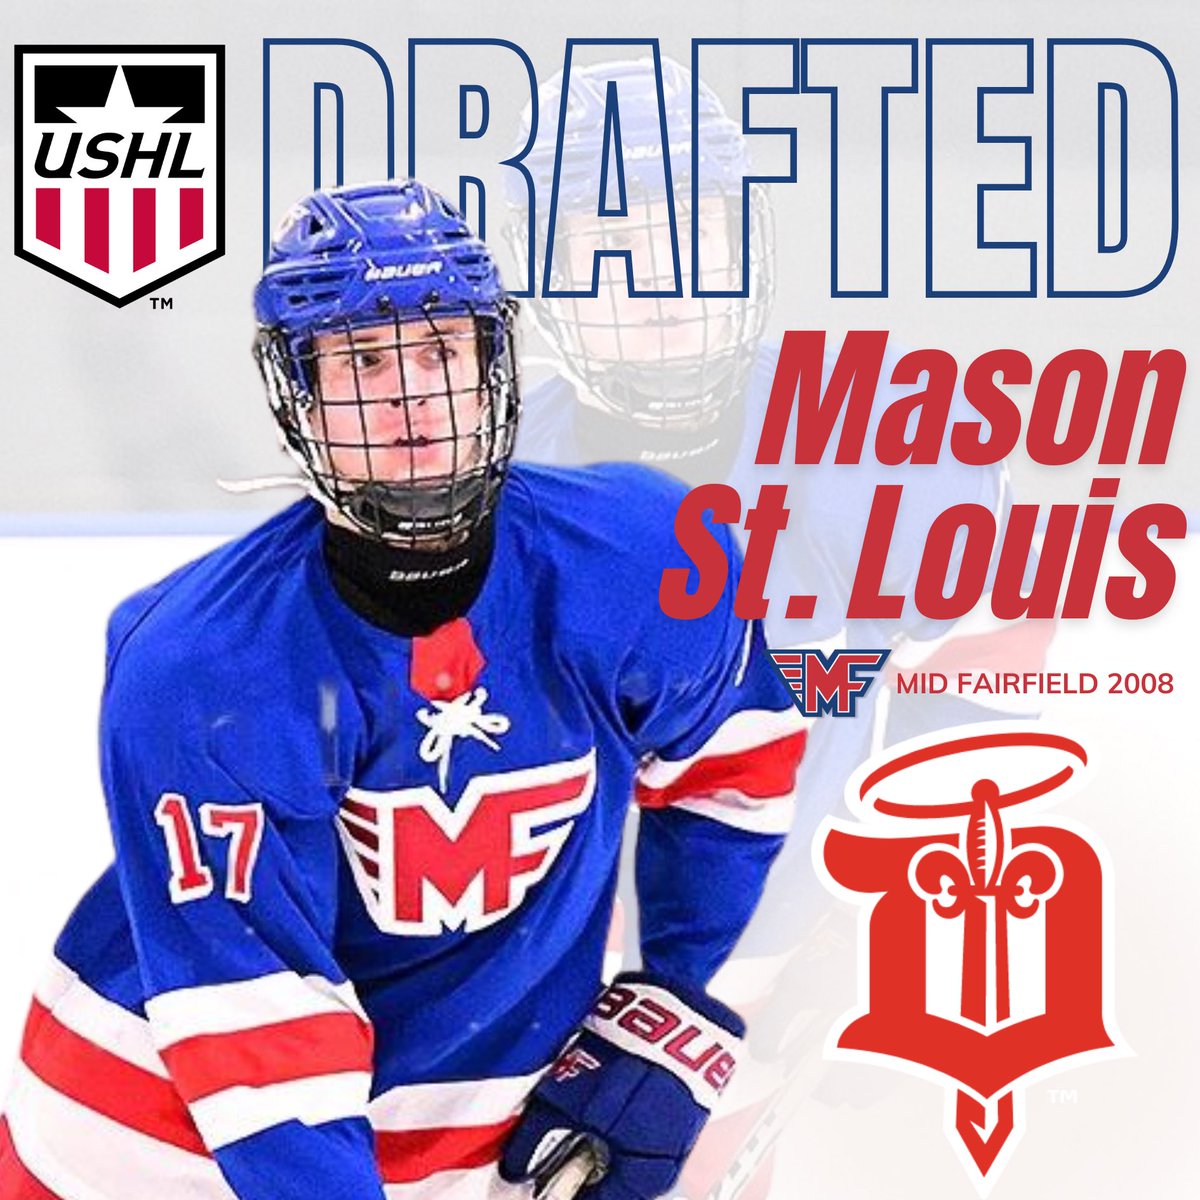 CONGRATS! Mason St. Louis has been selected by @fightingsaints in Round 7 of the @USHL Draft #RollMF #USHLdraft